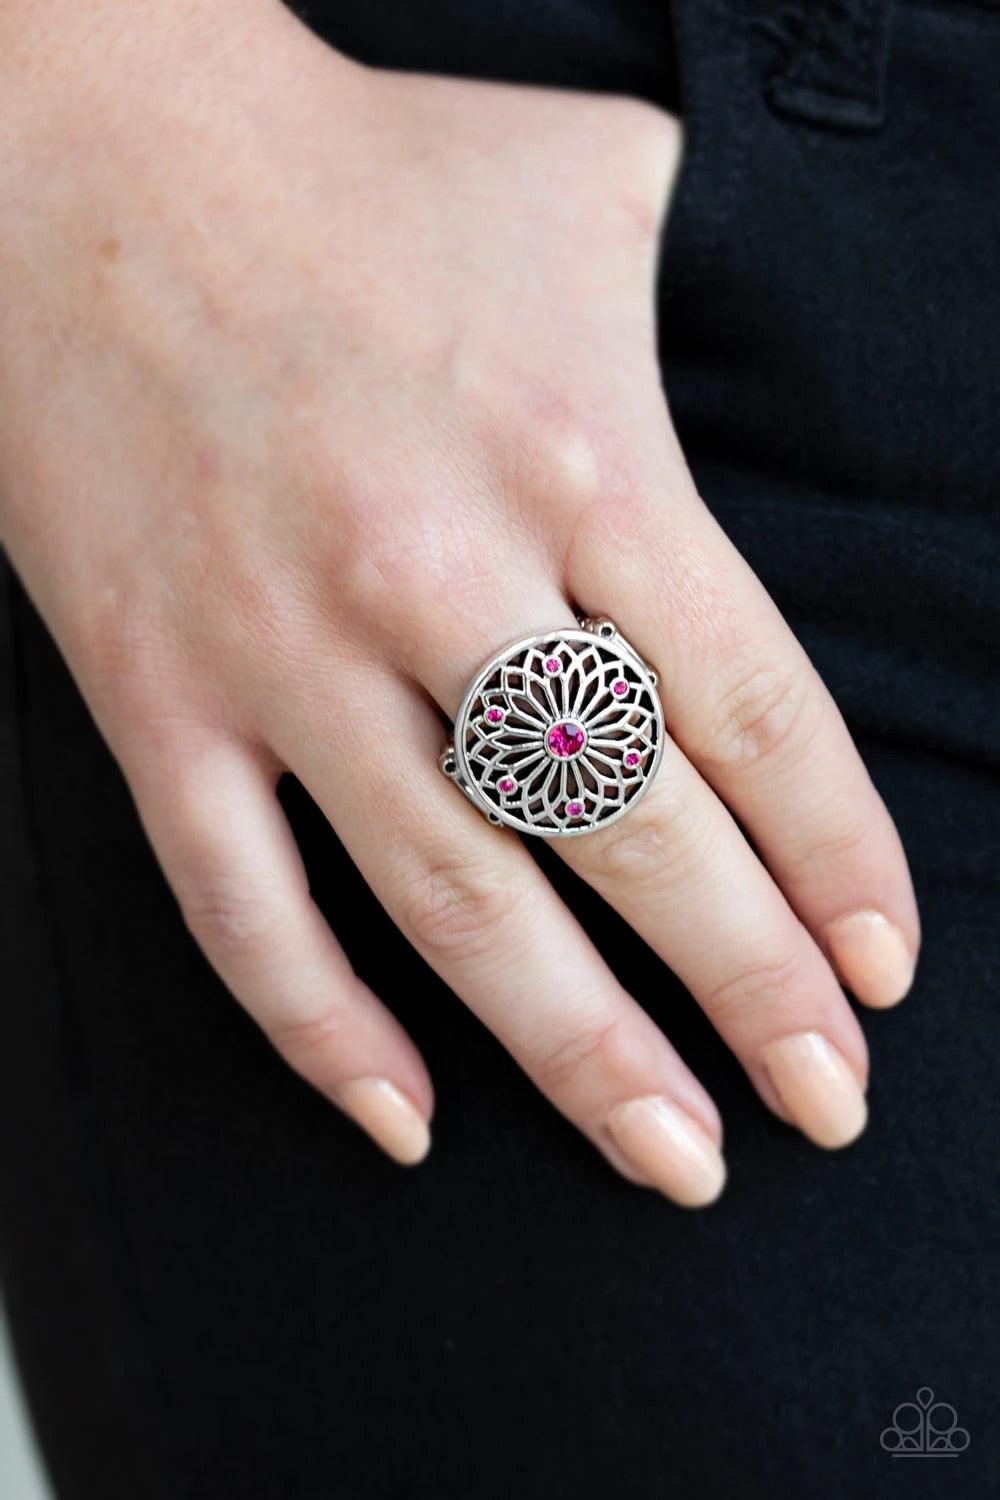 Paparazzi Accessories Mandal Magnificence - Pink Glittery pink rhinestones are sprinkled across a shimmery floral center, creating a whimsical mandala-like frame atop the finger. Features a stretchy band for a flexible fit. Sold as one individual ring. Ri